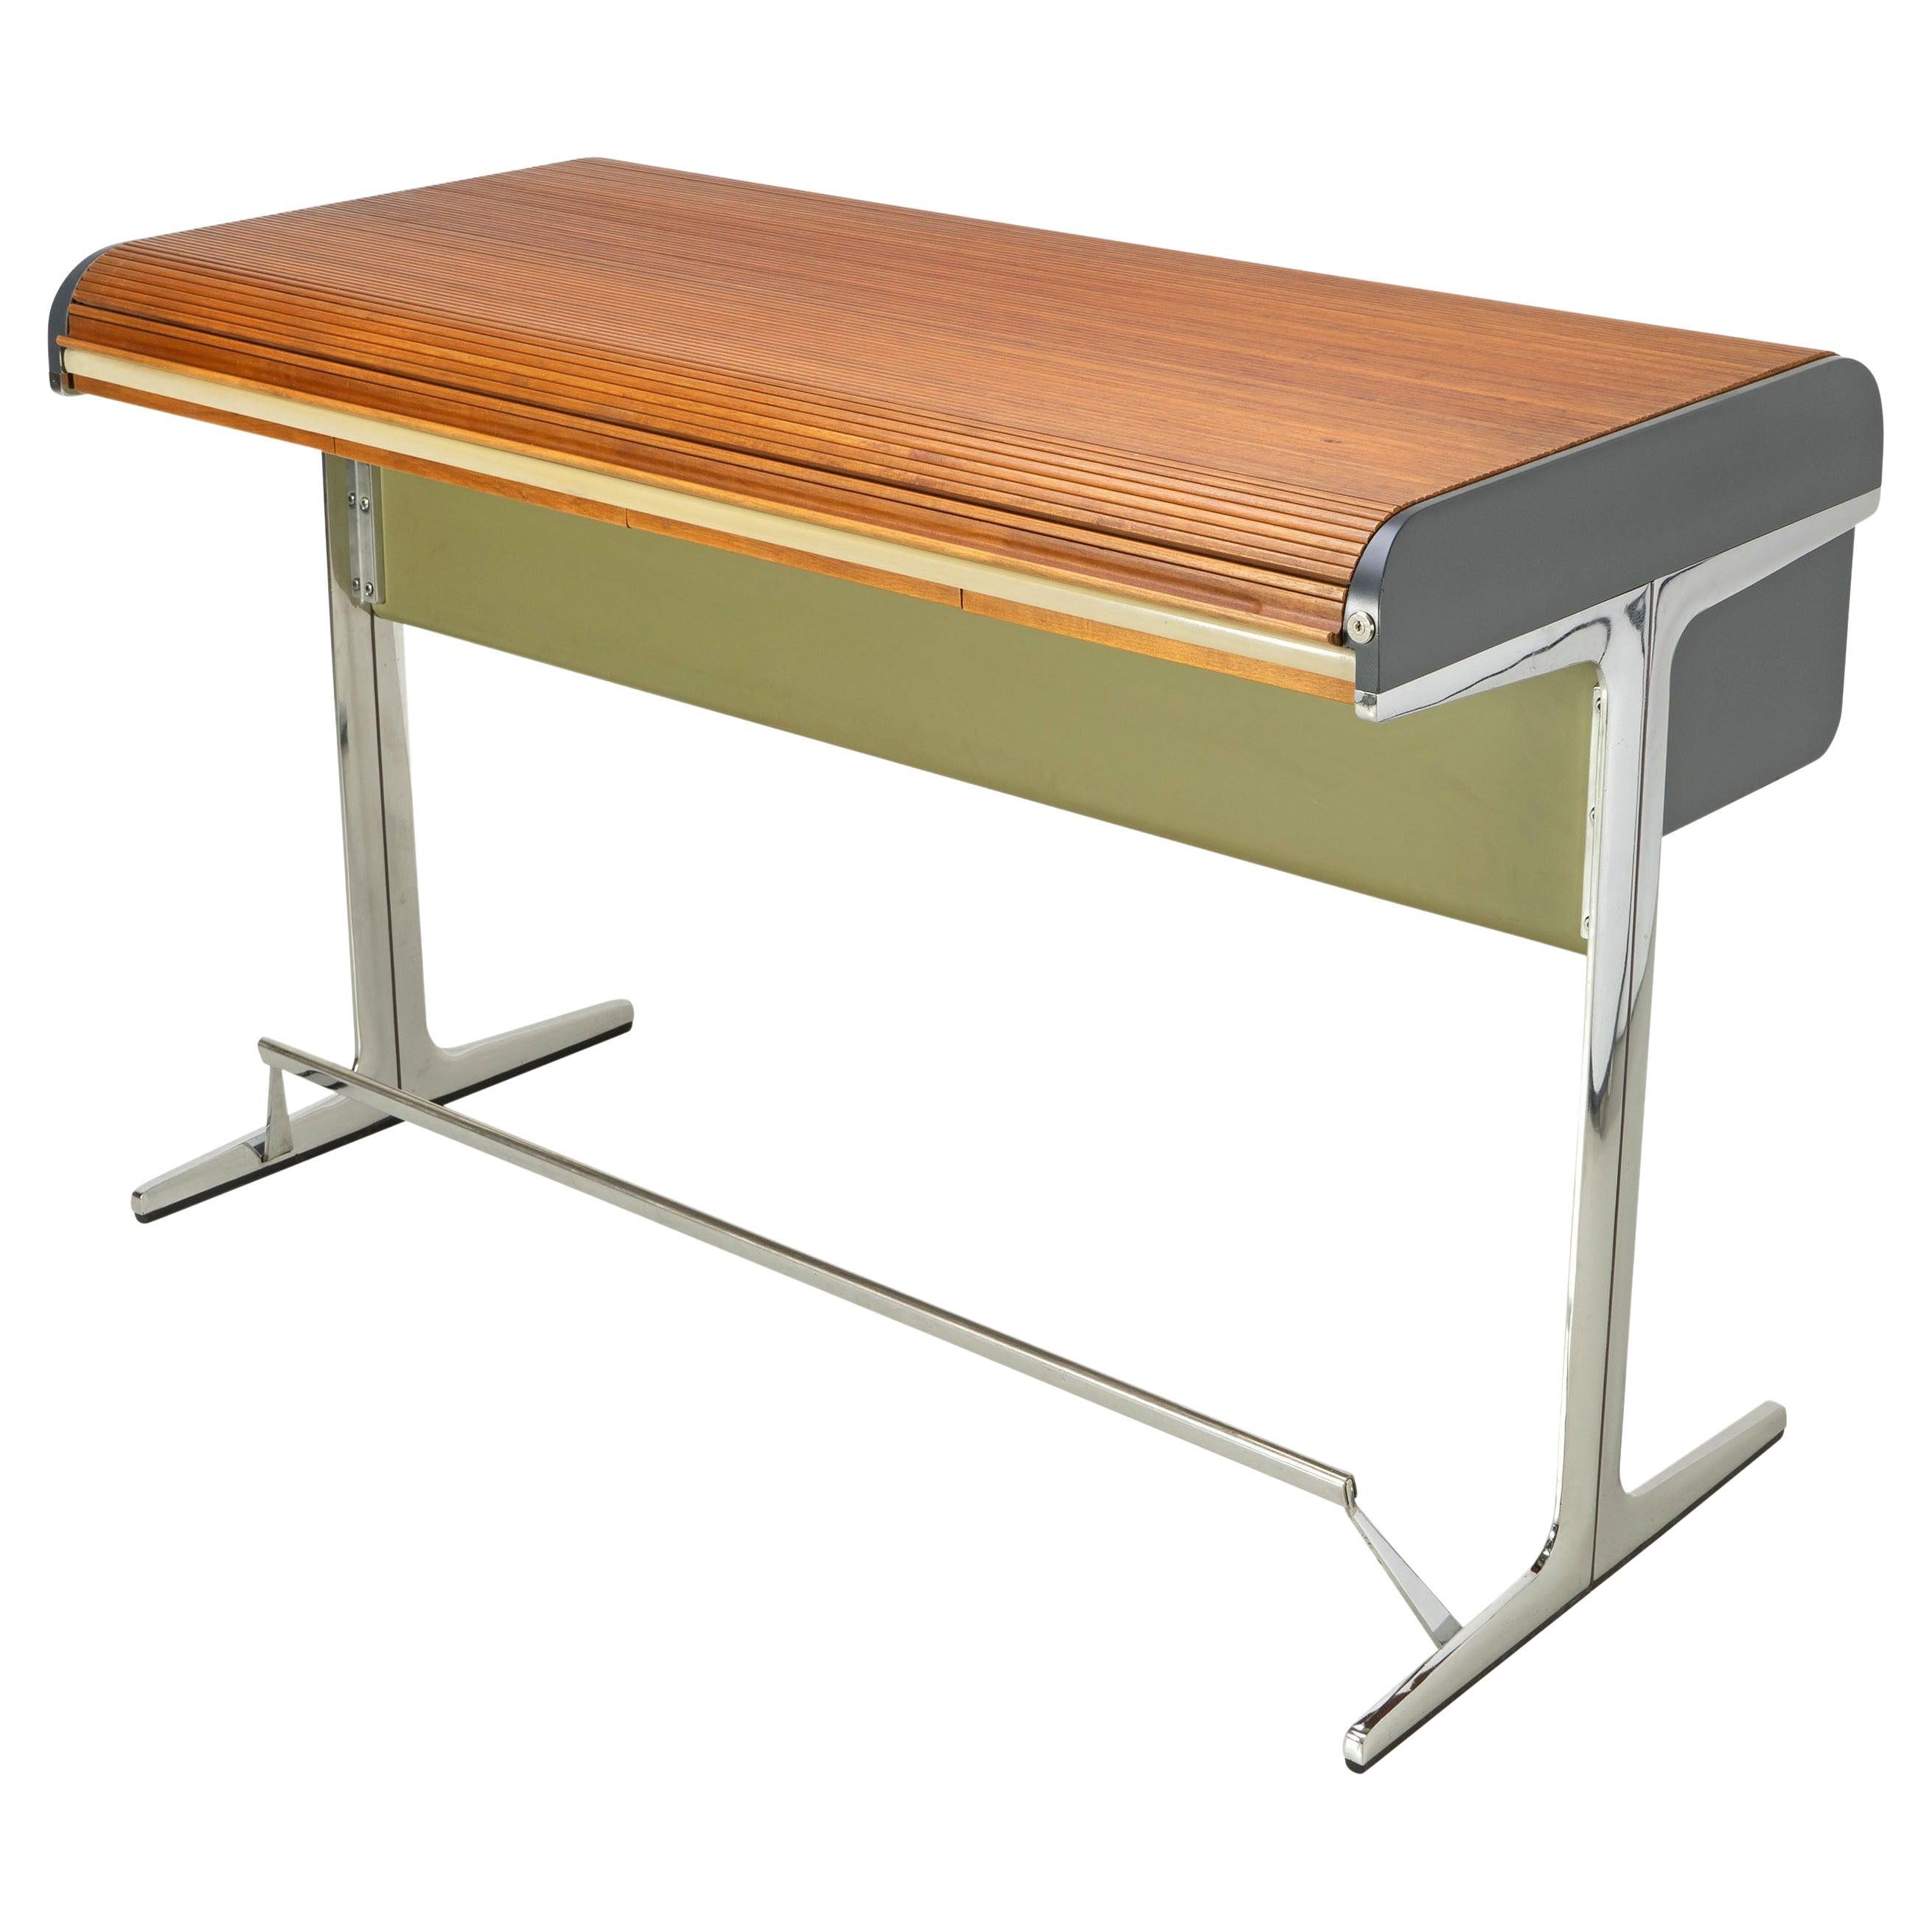 Standing-Height Roll-Top Desk and Chair by George Nelson "Action Office"